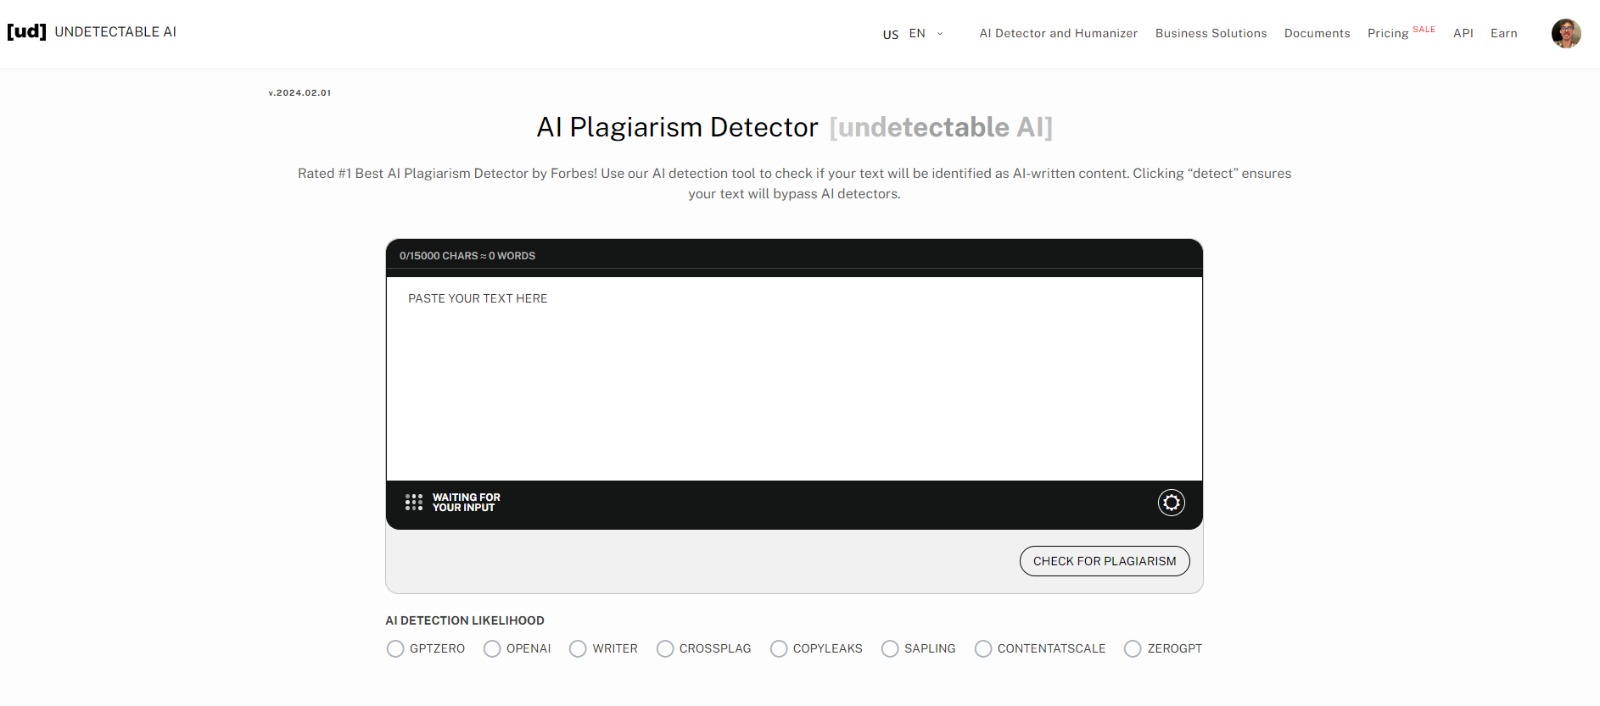 undetectable-ai-plagiarism-detector-homepage